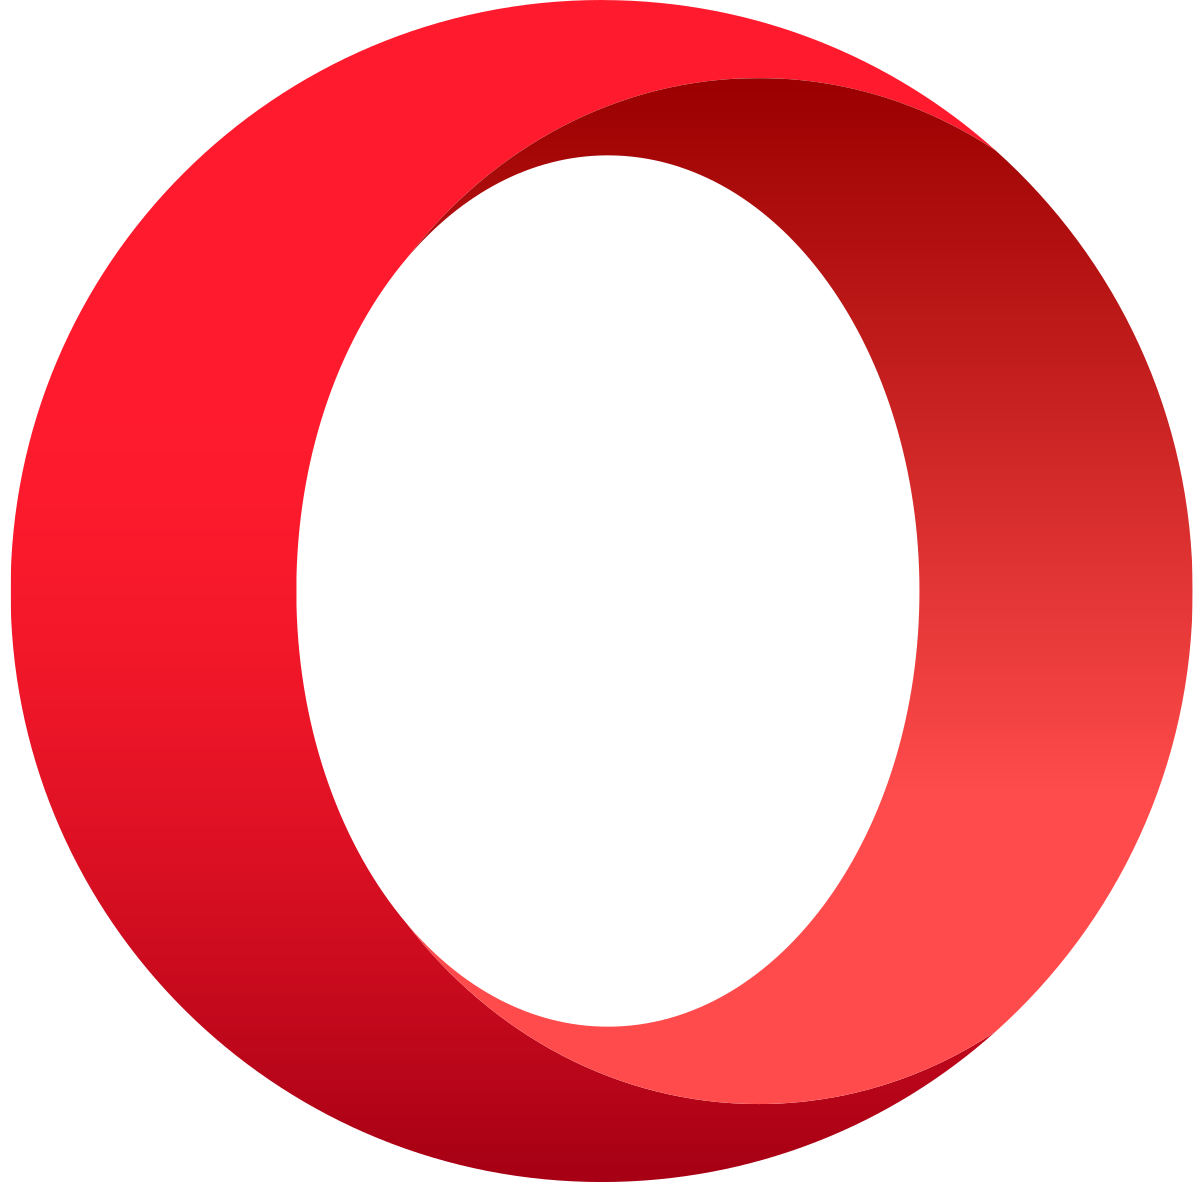 opera-mini-browser-now-supports-offline-file-transfer-feature-with-up